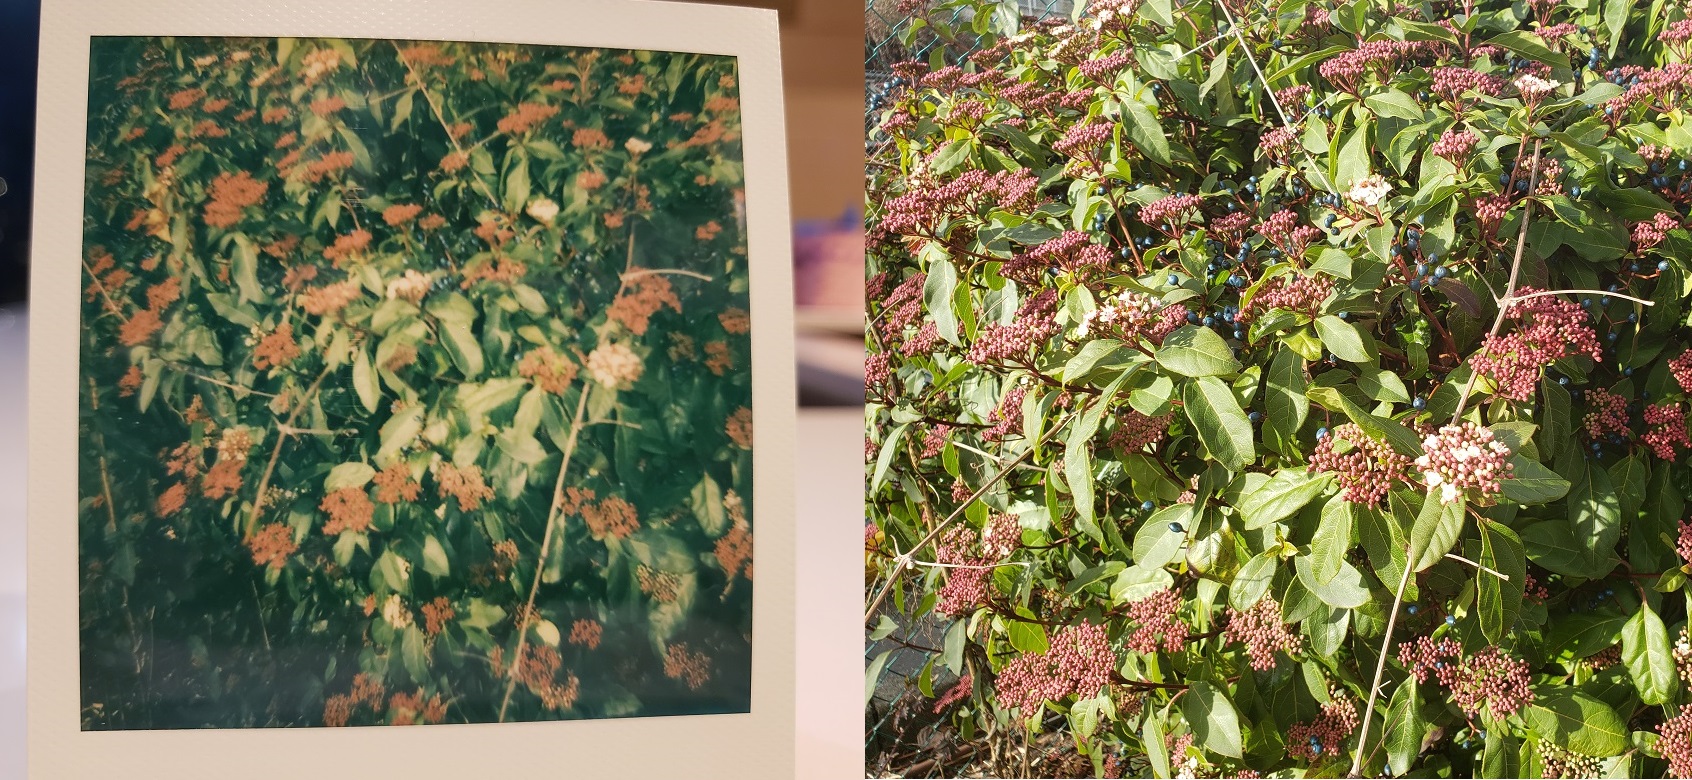 image of a Polaroid photos of colourful bushes next to the same photo taken with a digital camera